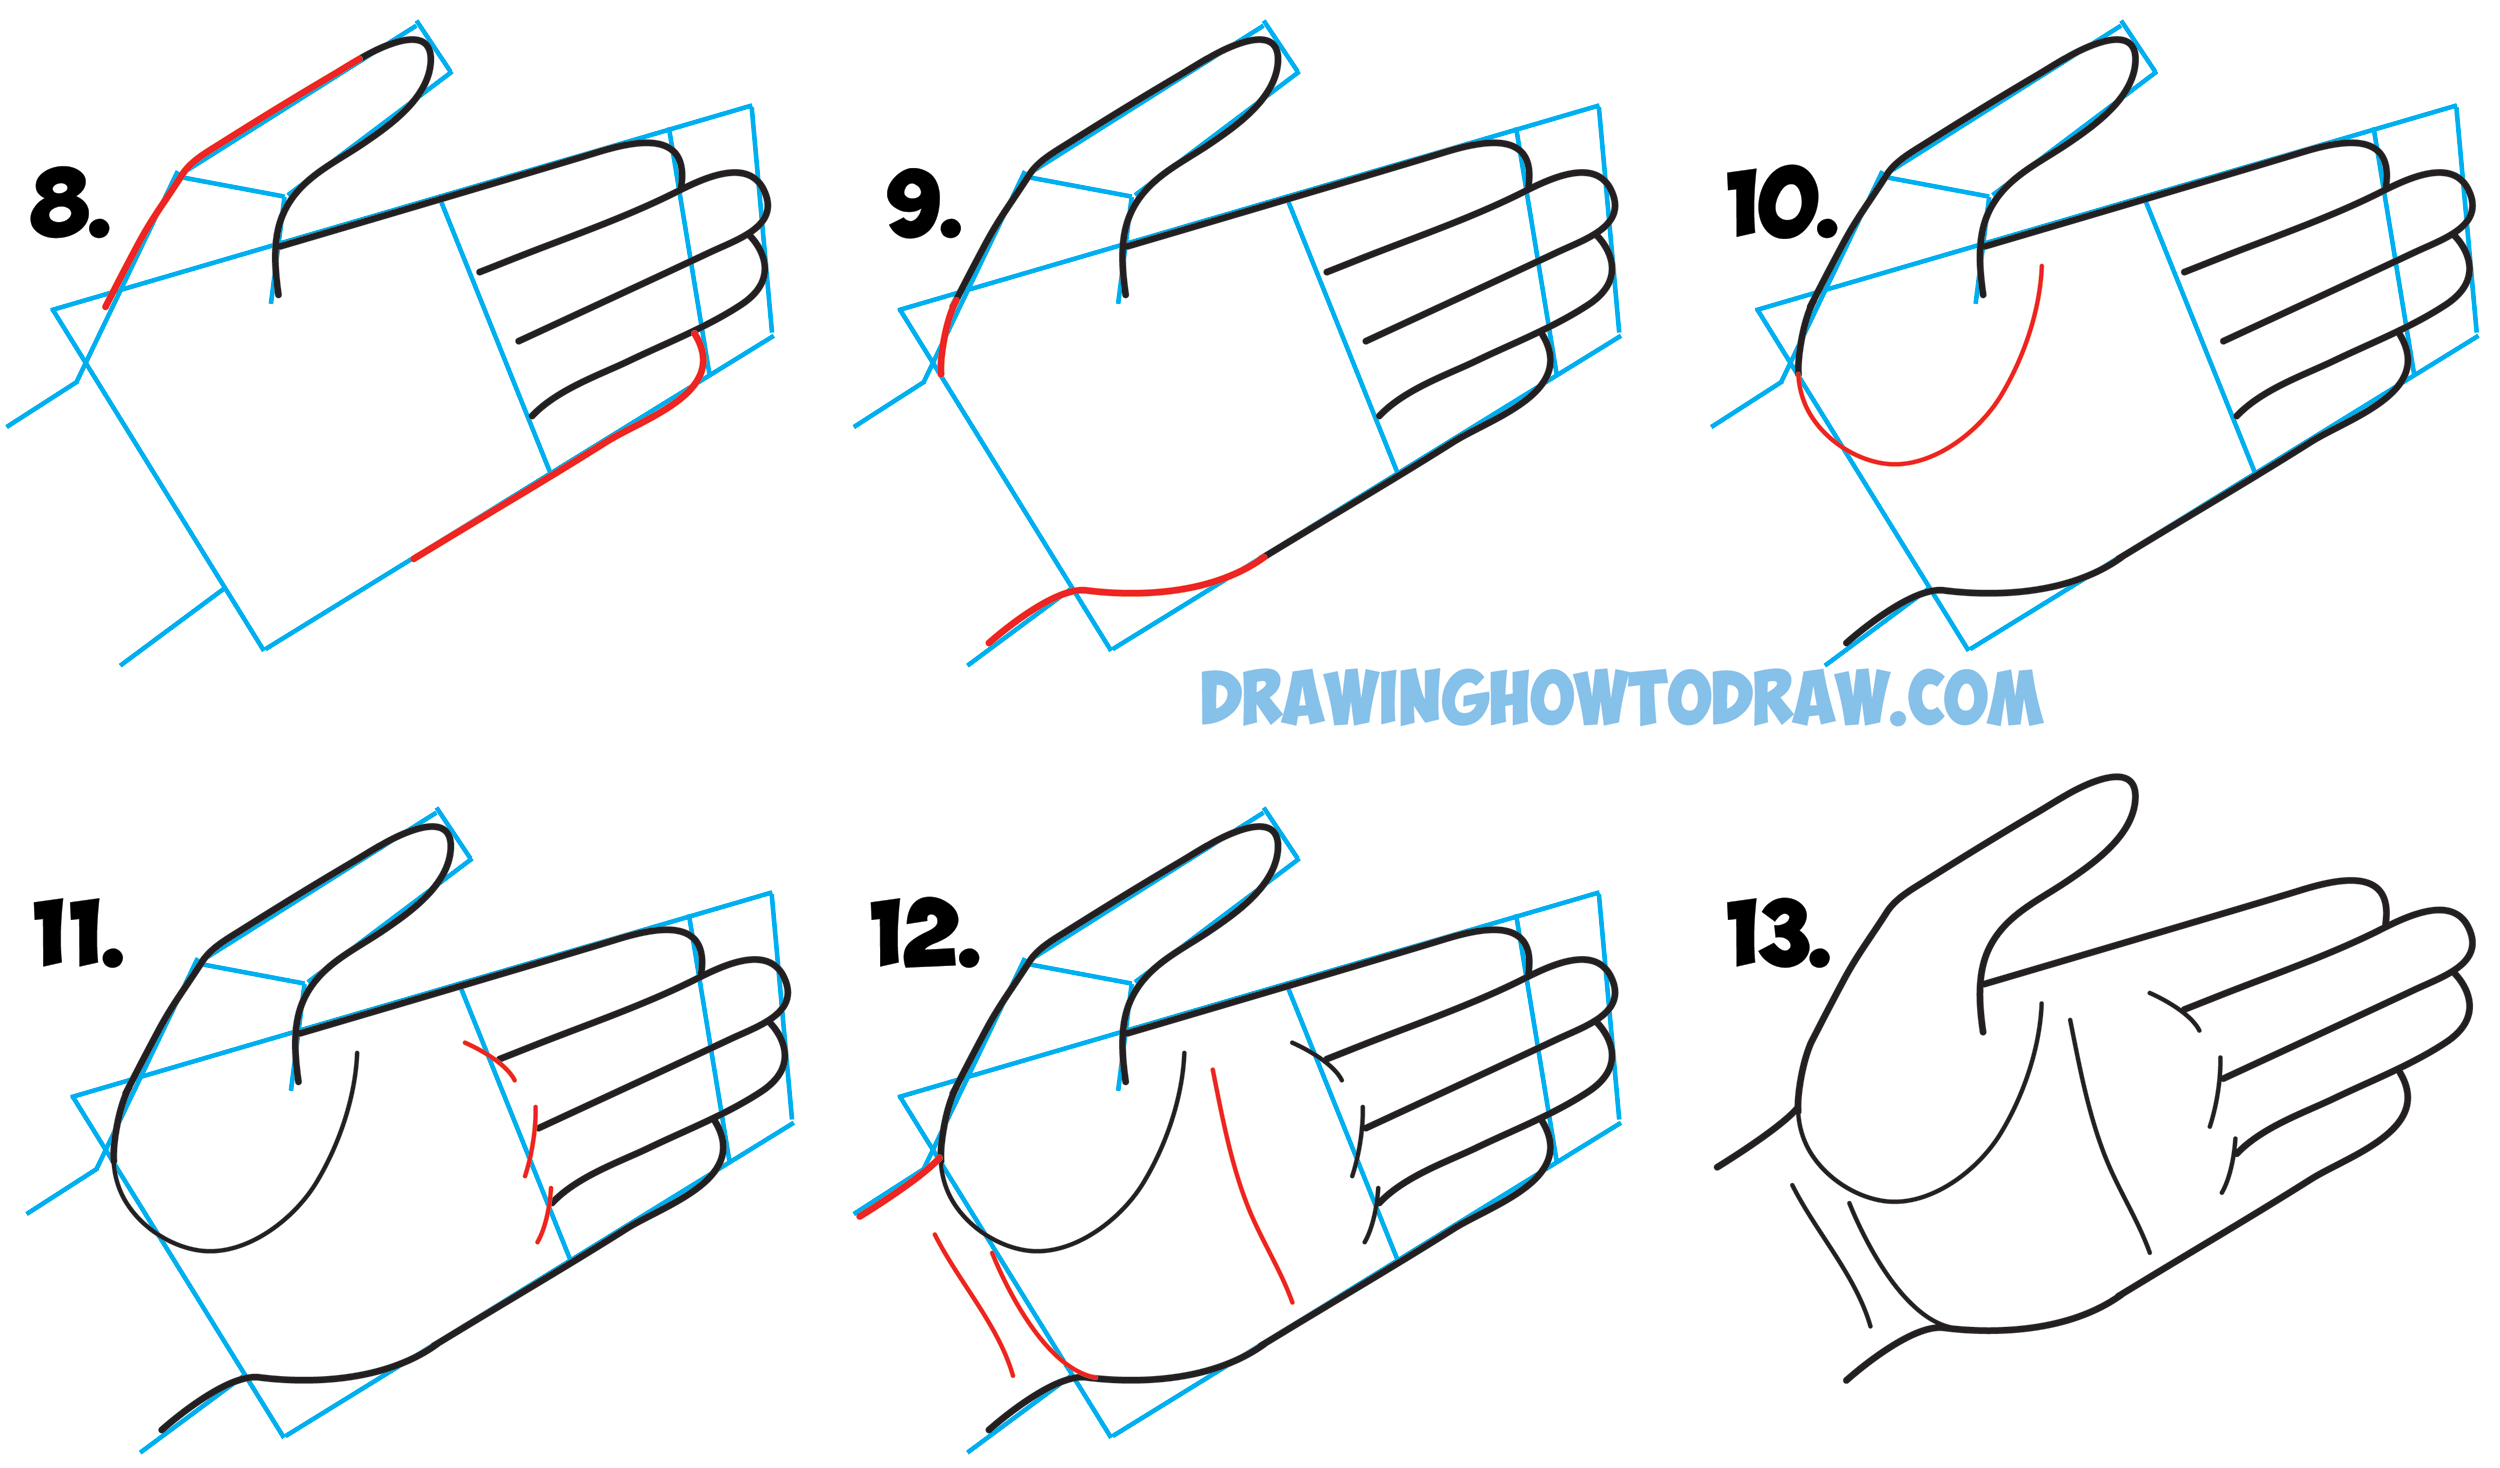 How To Draw Anime Hands Step By Step For Beginners - The glove/mitten ...